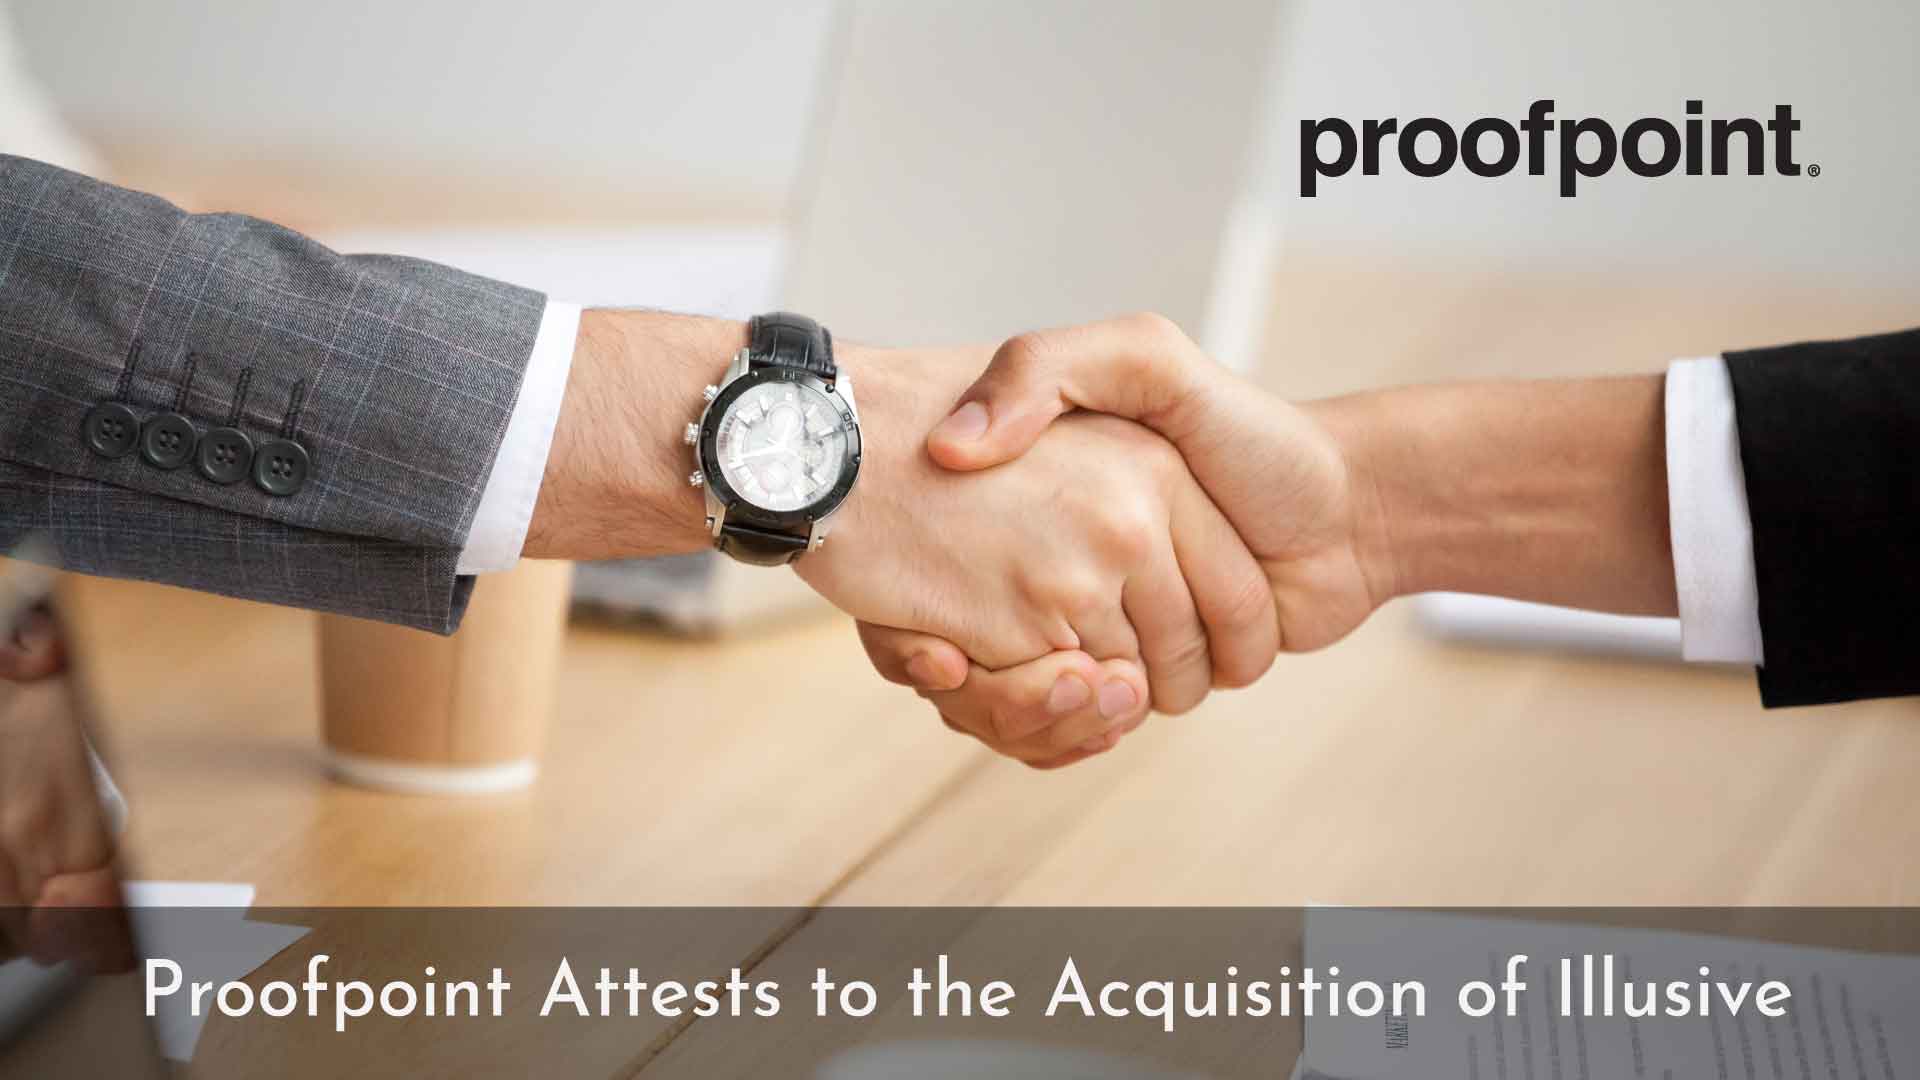 Proofpoint Signs Definitive Agreement to Acquire Illusive